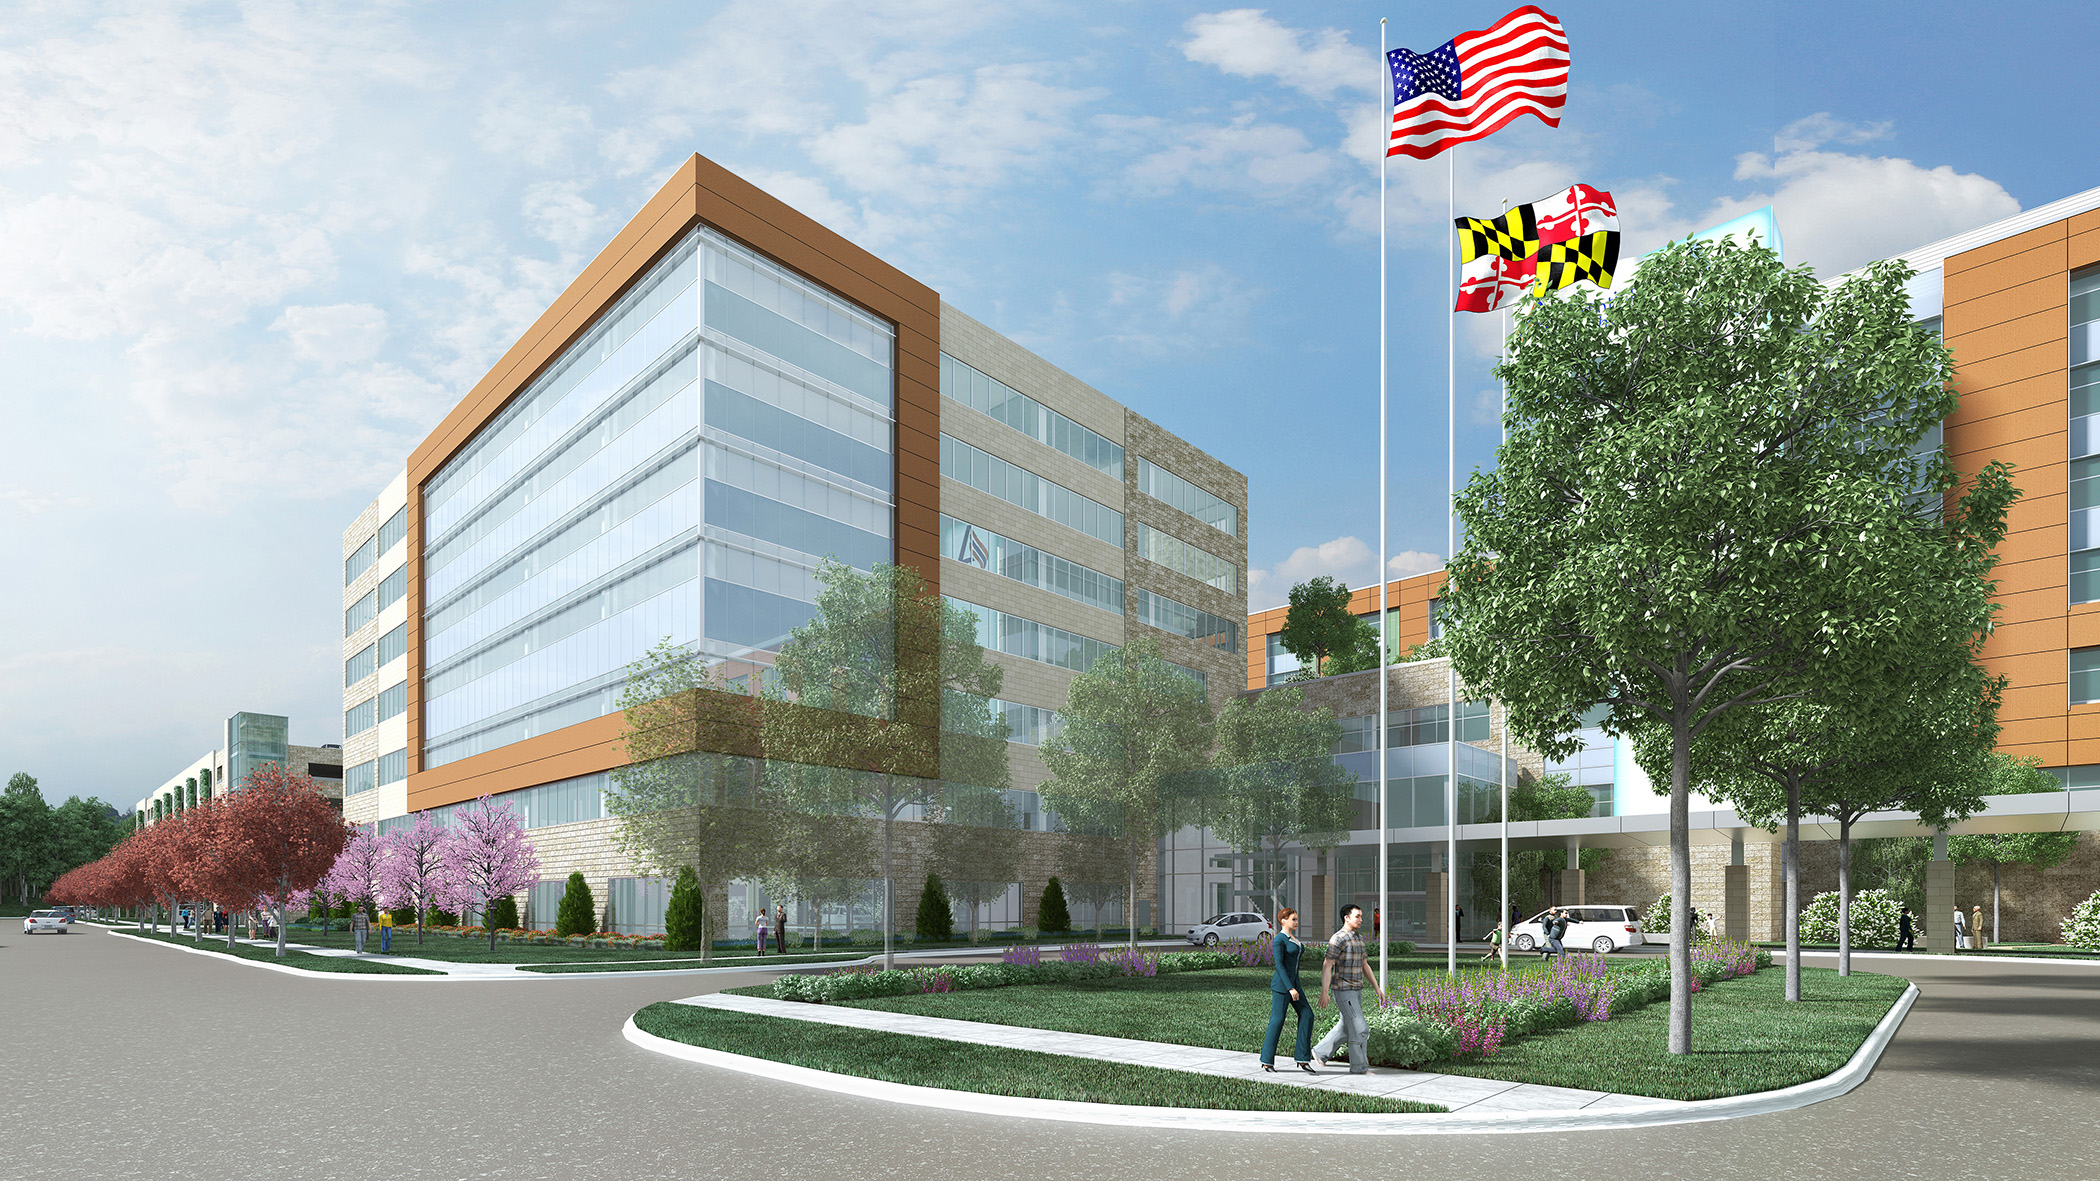 The 169,000 square foot Medical Pavilion at White Oak will offer multiple connections to the new 180-bed Adventist HealthCare White Oak Medical Center in Silver Spring, Md.